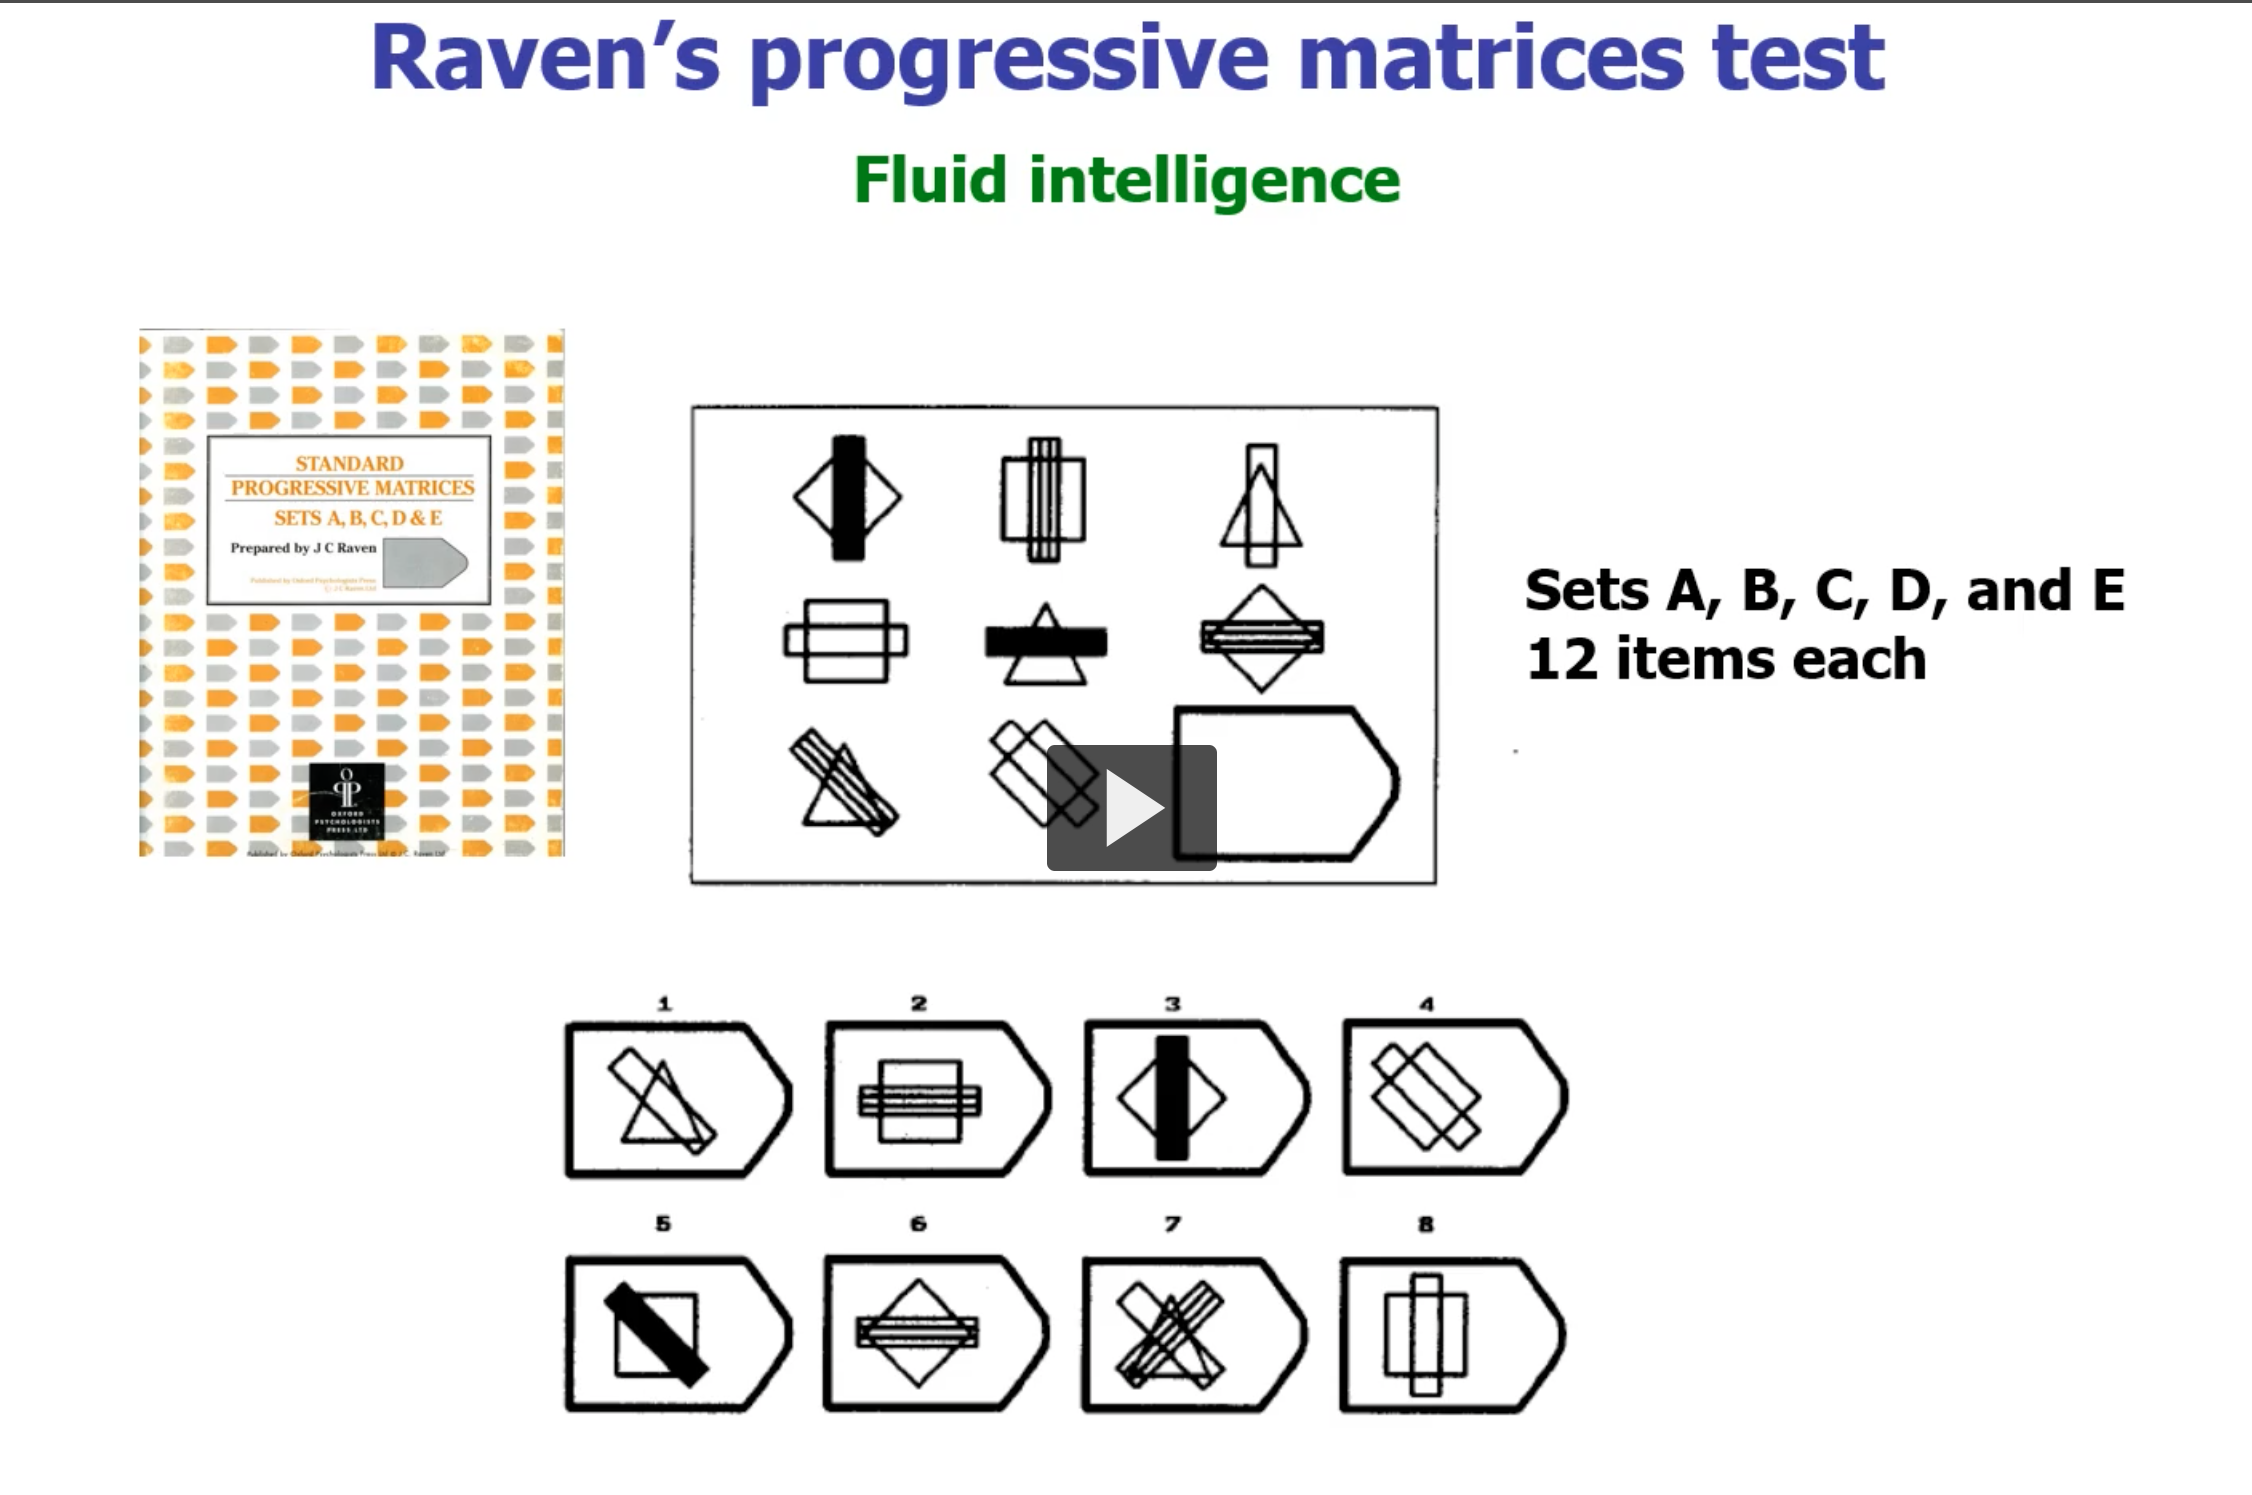 <ul><li><p>Progressive Matrices Test: 3*3 Matrix with bottom right cell missing and task is to determine regularities in the other cells and then select the missing cell form among 8 alternatives</p></li></ul><p>→ measures fluid intelligence</p>